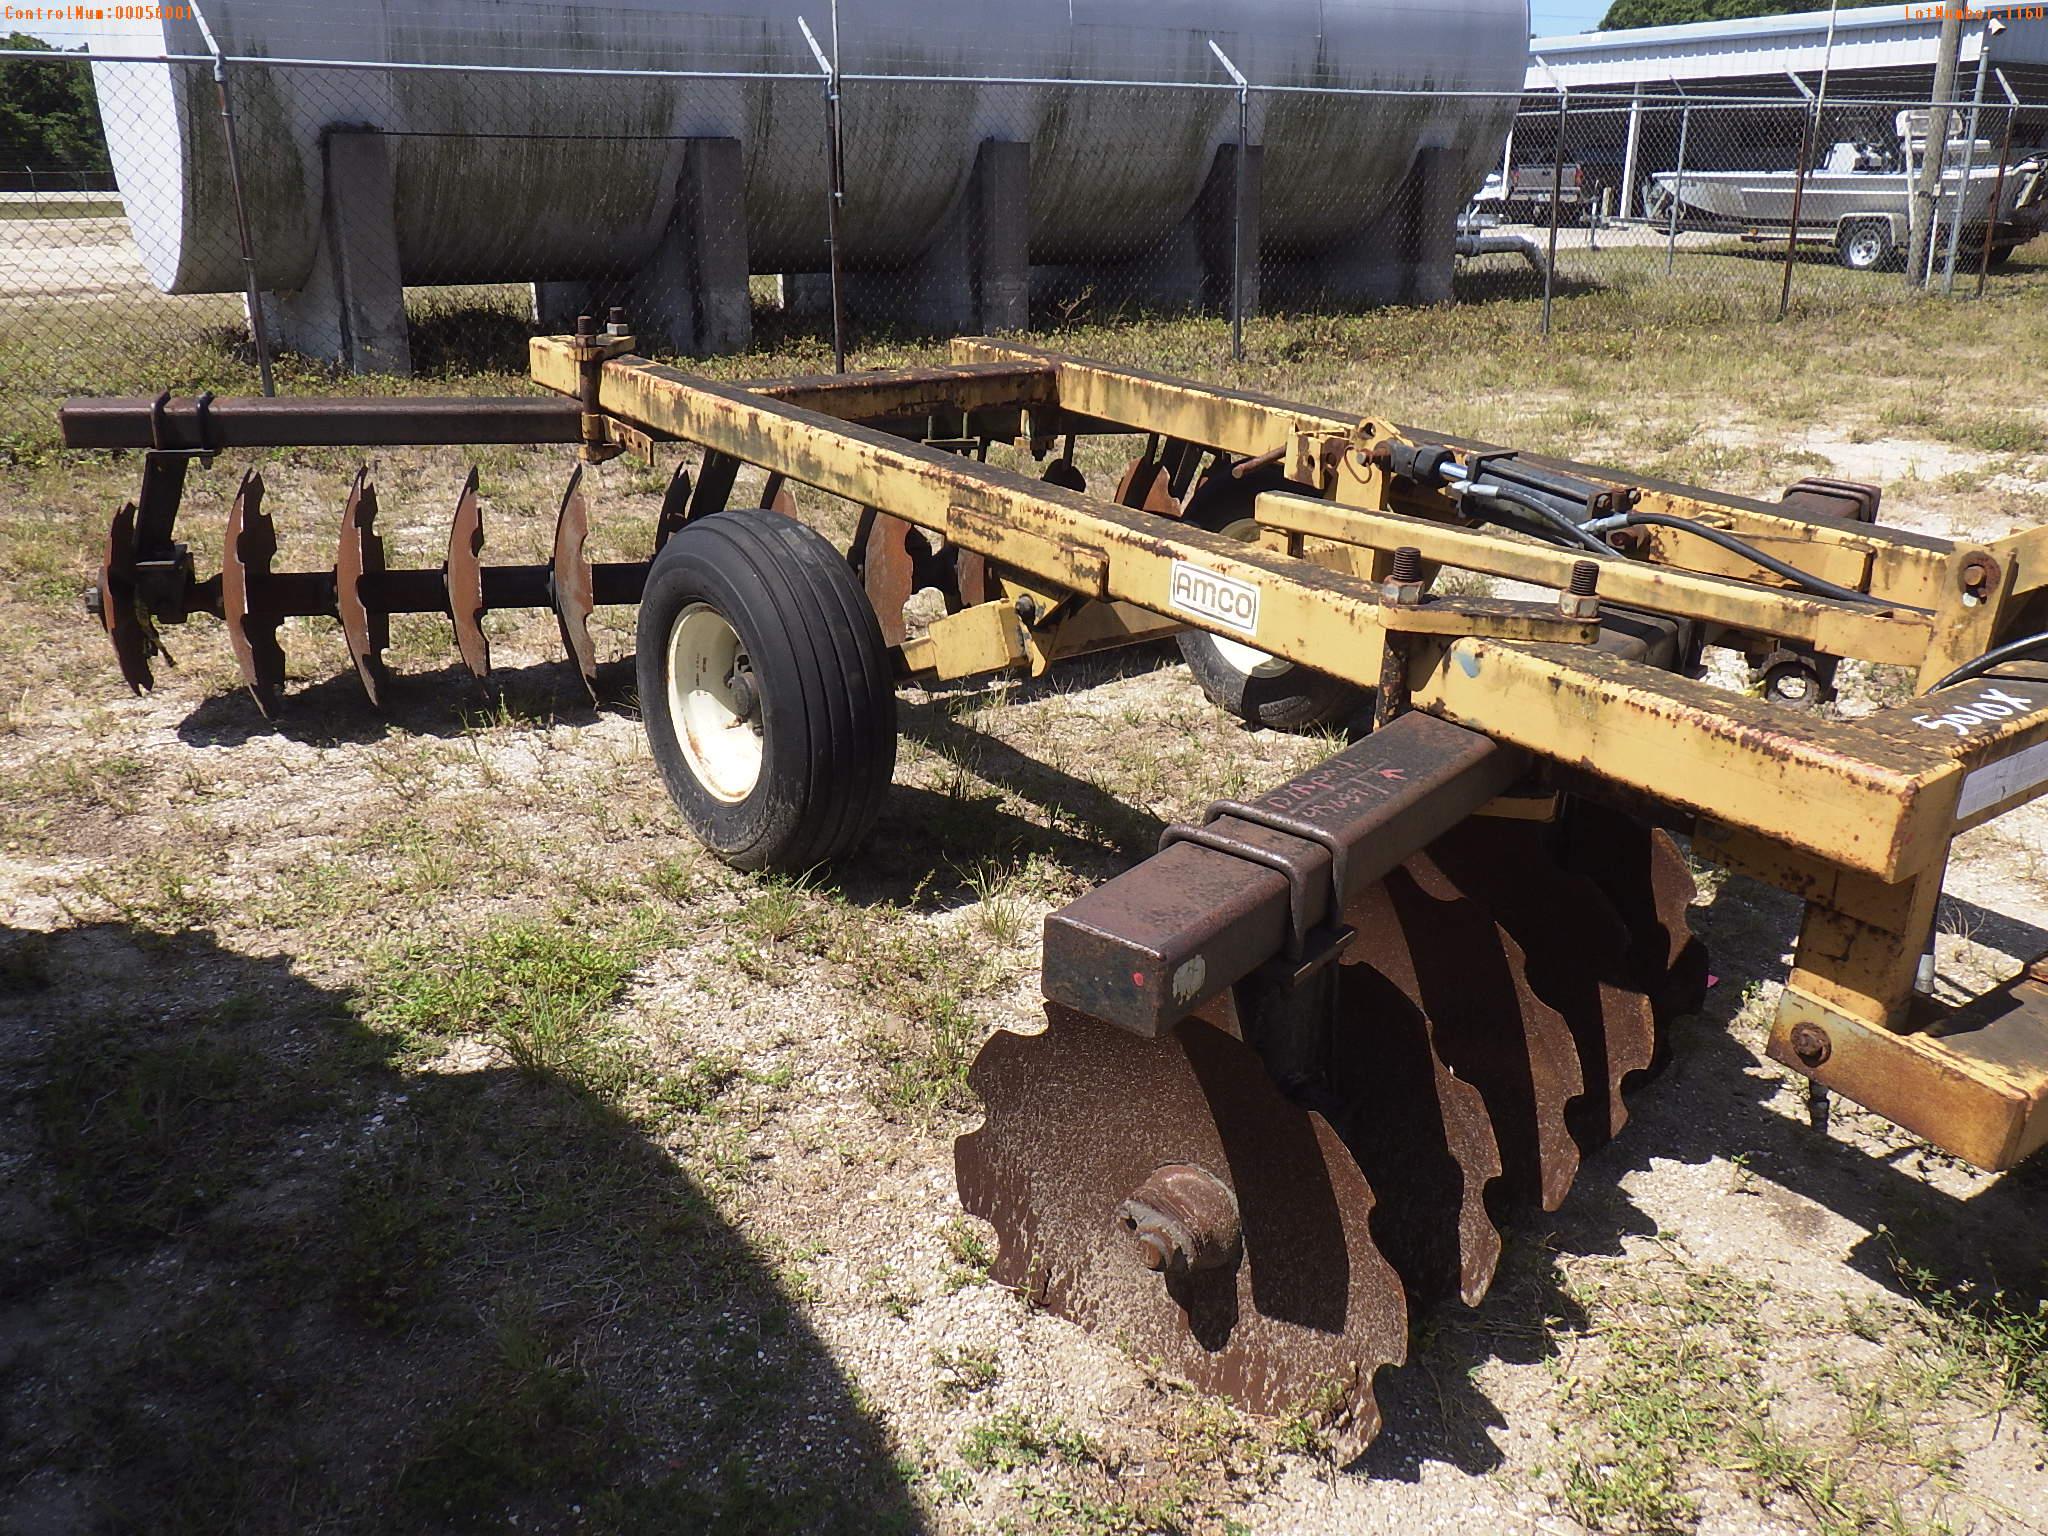 6-01160 (Equip.-Implement Farm)  Seller: Gov-Manatee County AMCO 148-009 DRAW BA